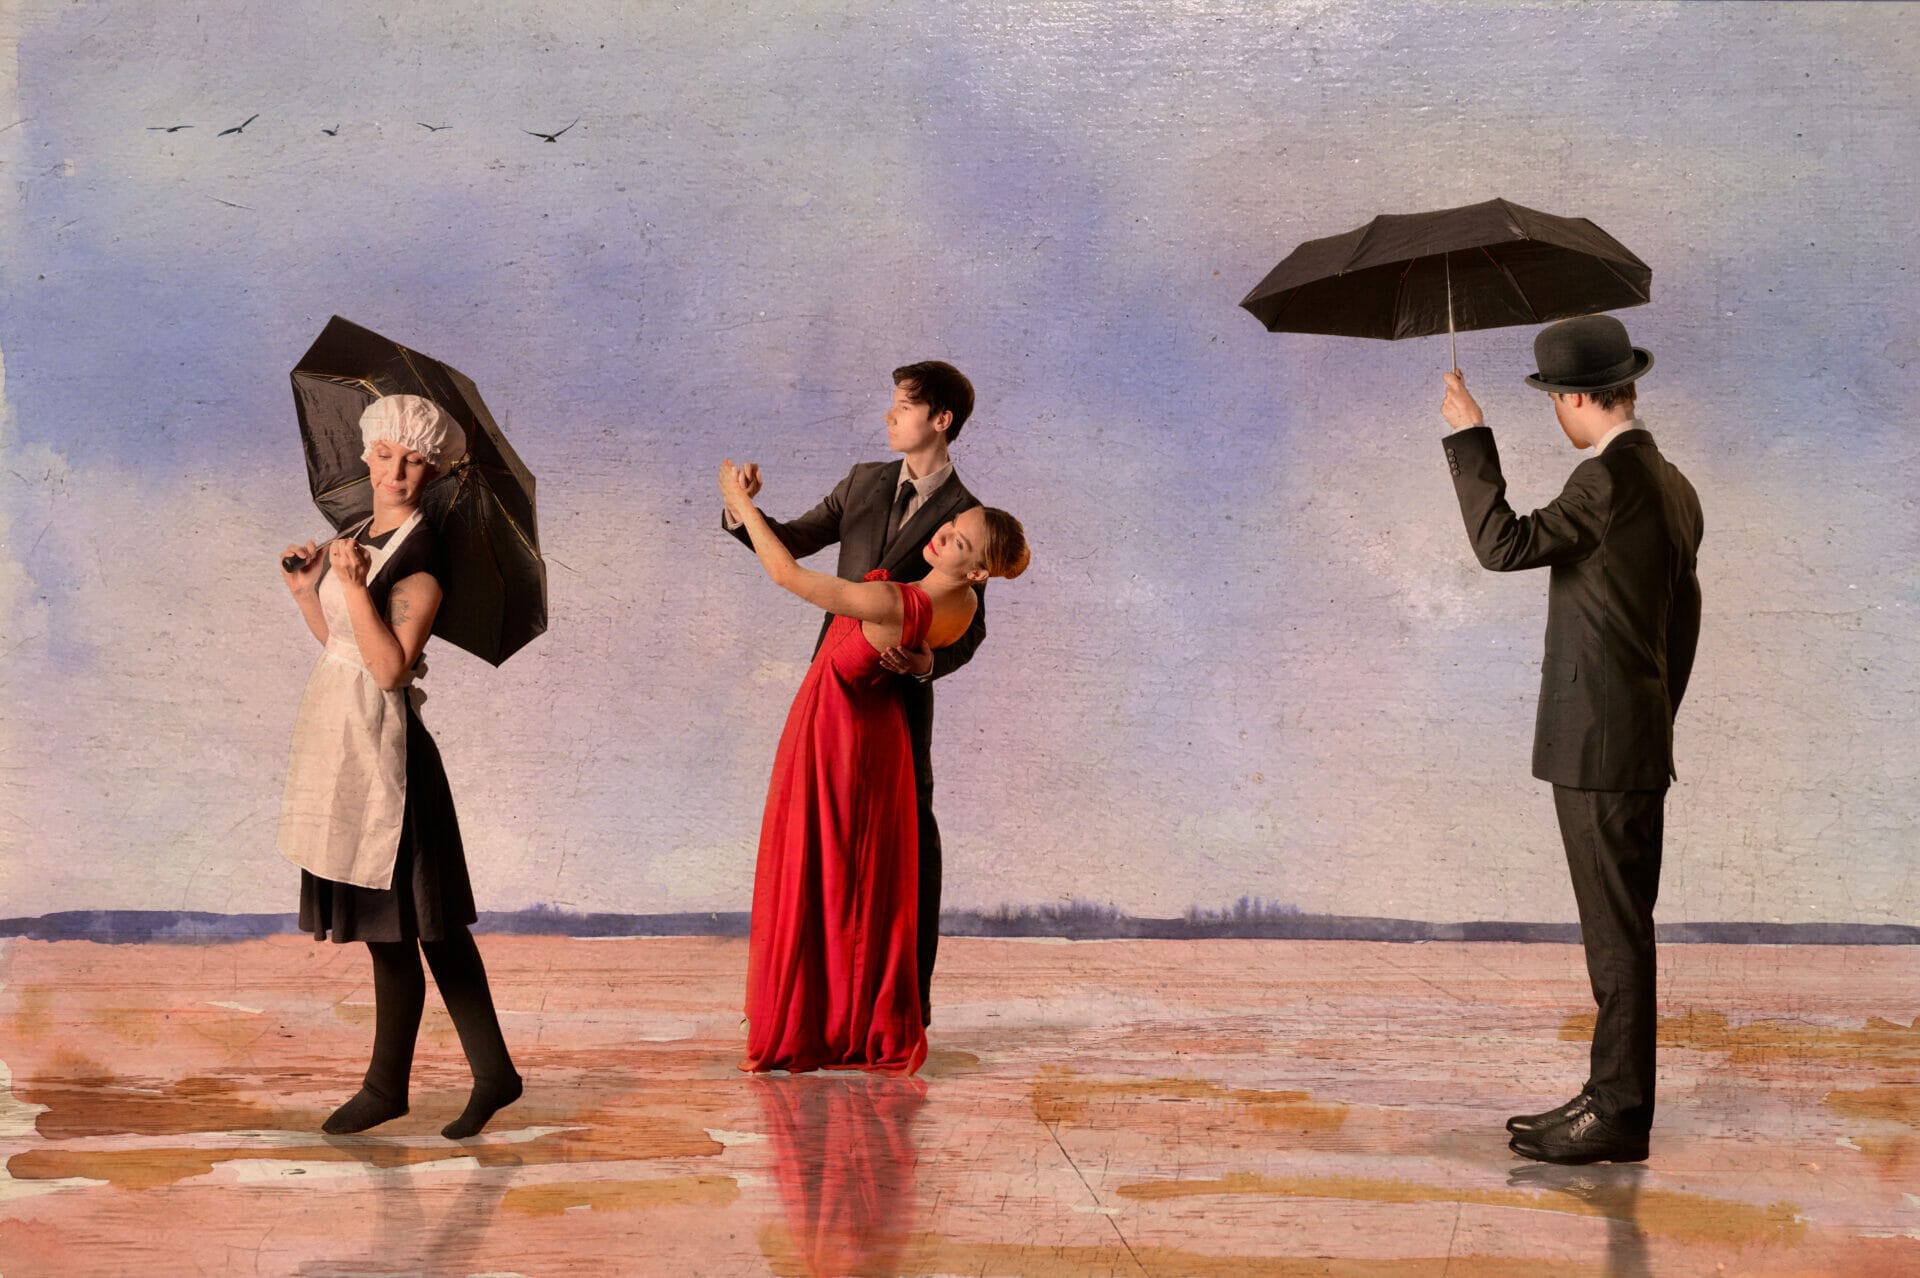 Themed Photo-Shoot: Recreate A Grand Master Paining with Welshot - Photograph depicting The Singing Butler by ack Vettriano